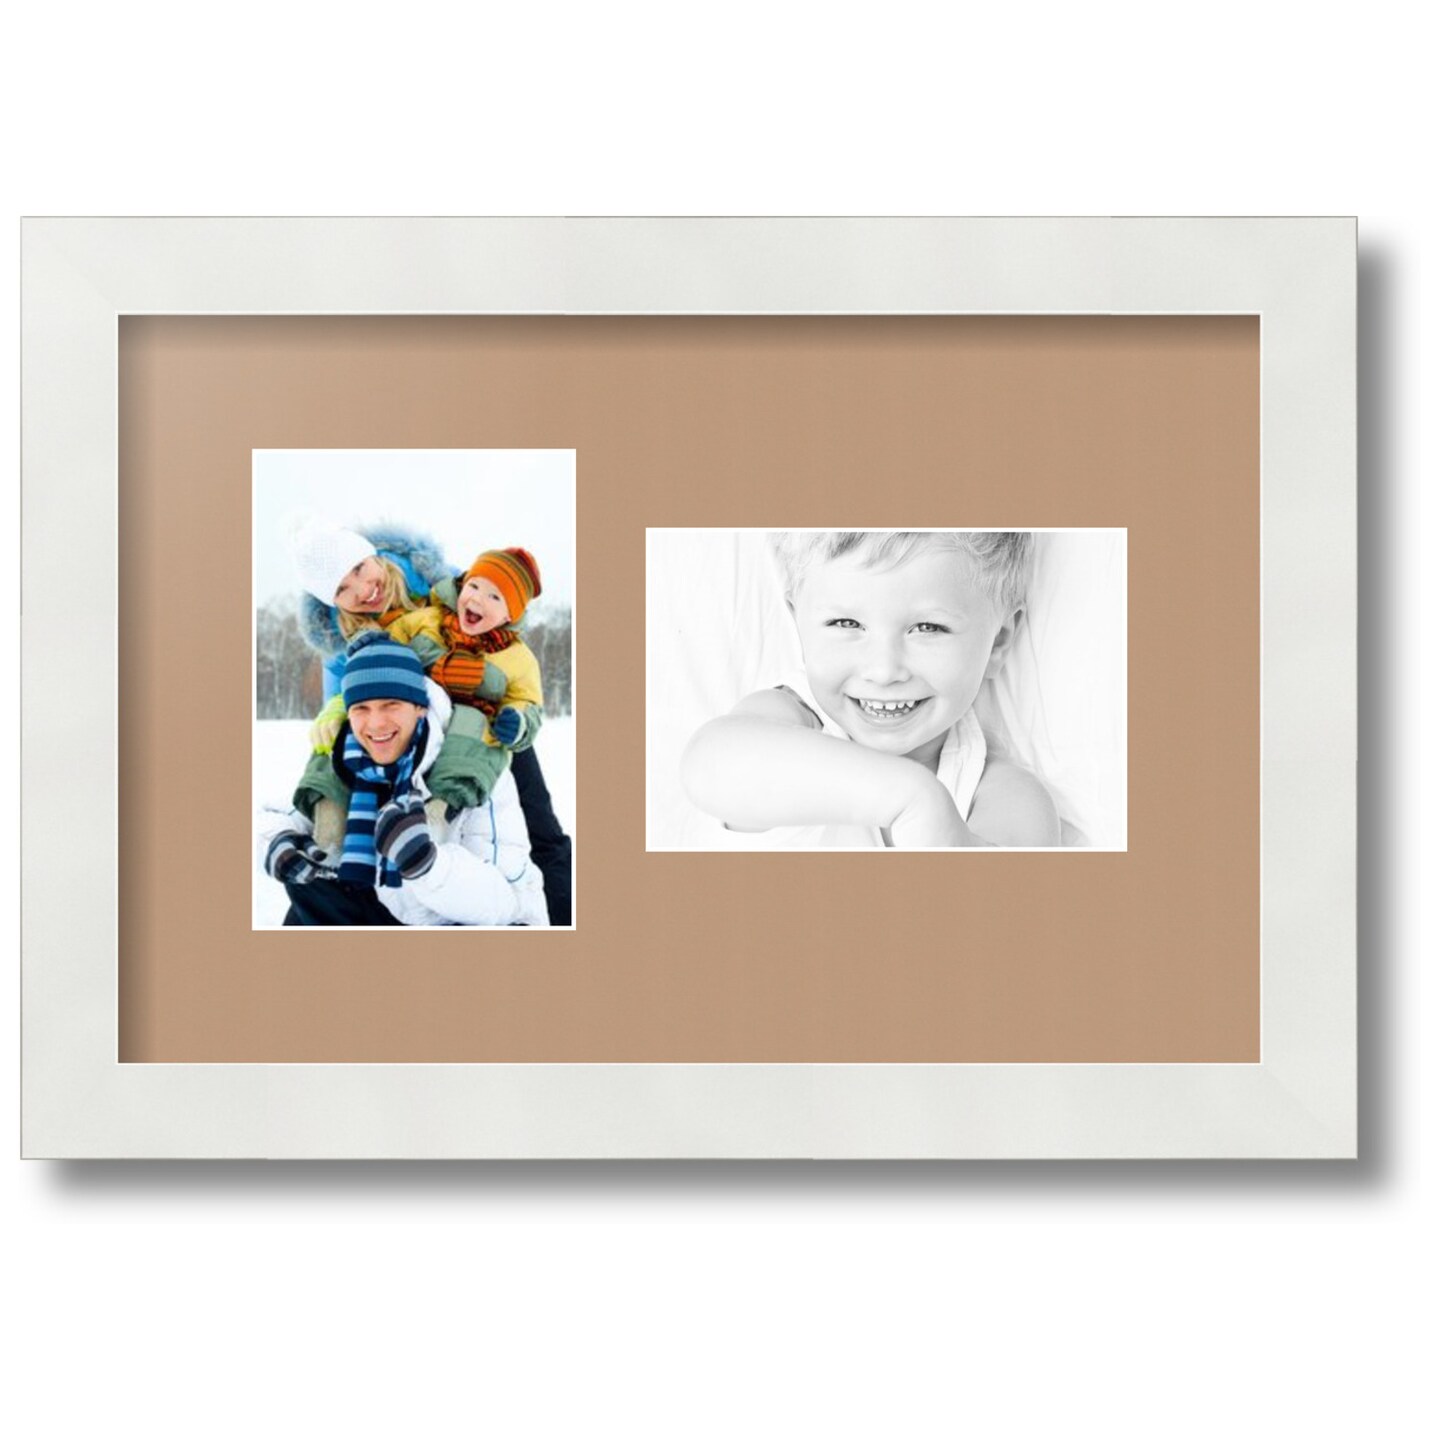 ArtToFrames Collage Photo Picture Frame with 2 - 4x6 inch Openings, Framed in White with Over 62 Mat Color Options and Regular Glass (CSM-3966-102)